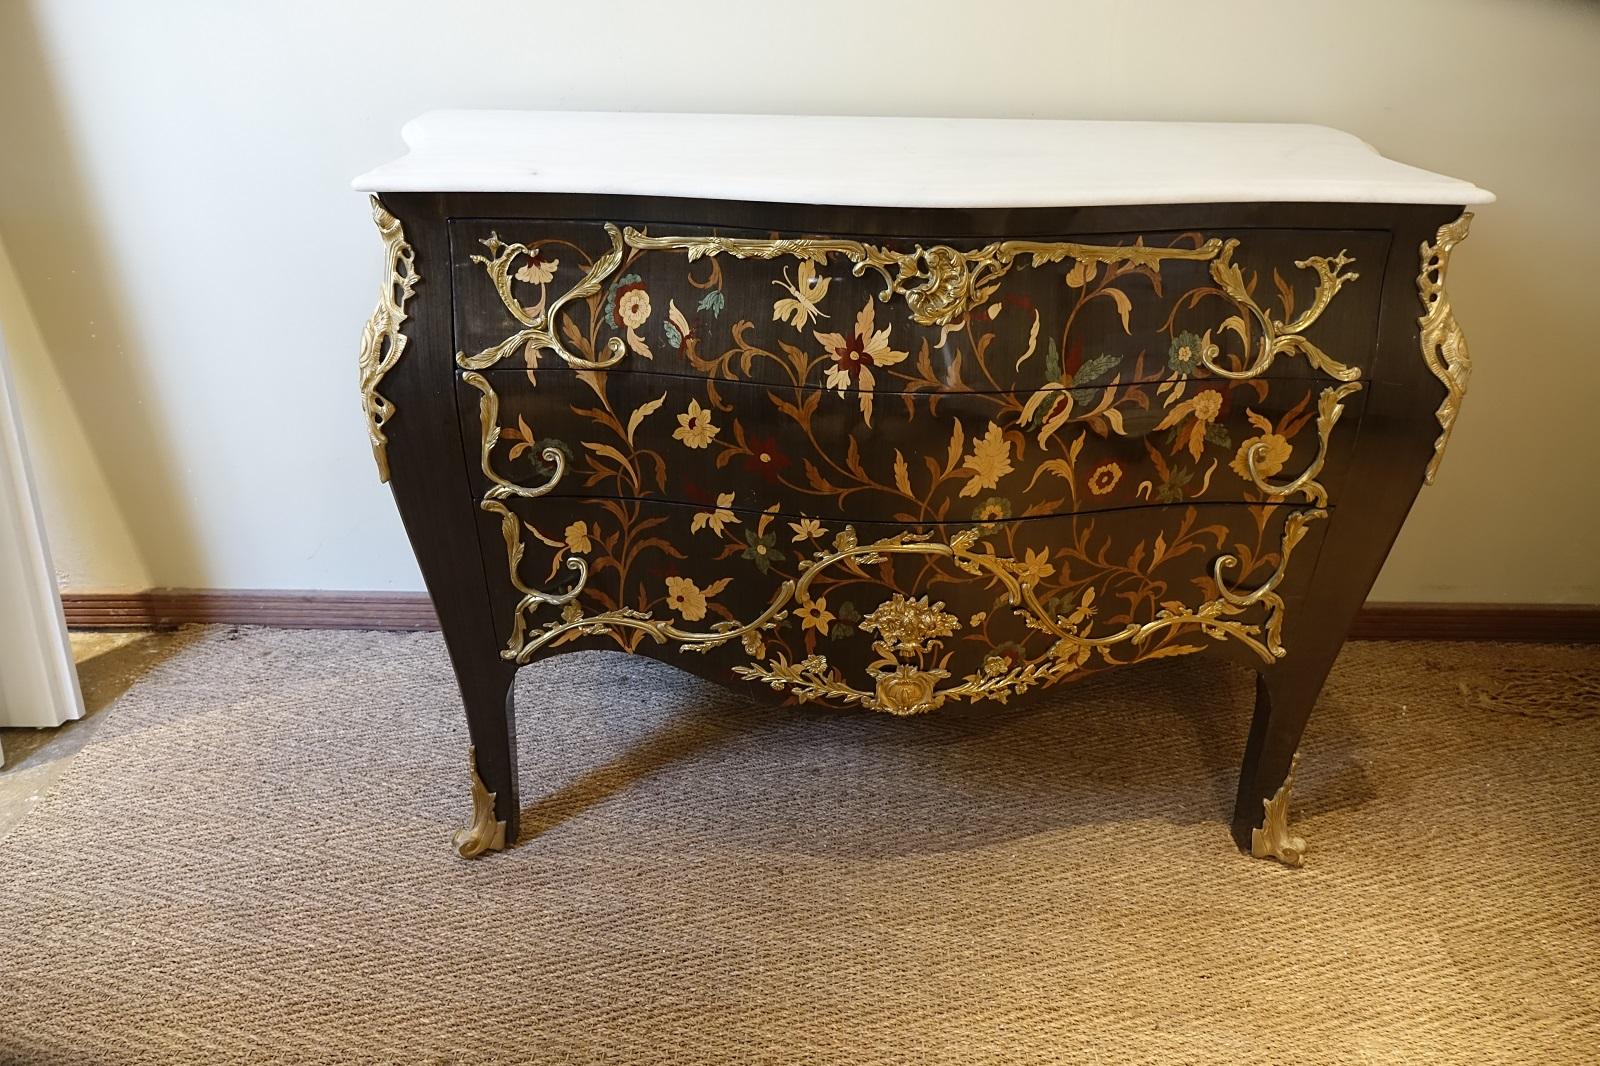 Beautifully made chest of drawers, inlaid with hand cut marquetry covering the front and sides. The style is traditional Louie XV with an oriental influence (chinoiserie) in the marquetry details. The effect is finished with bronze detailing acting